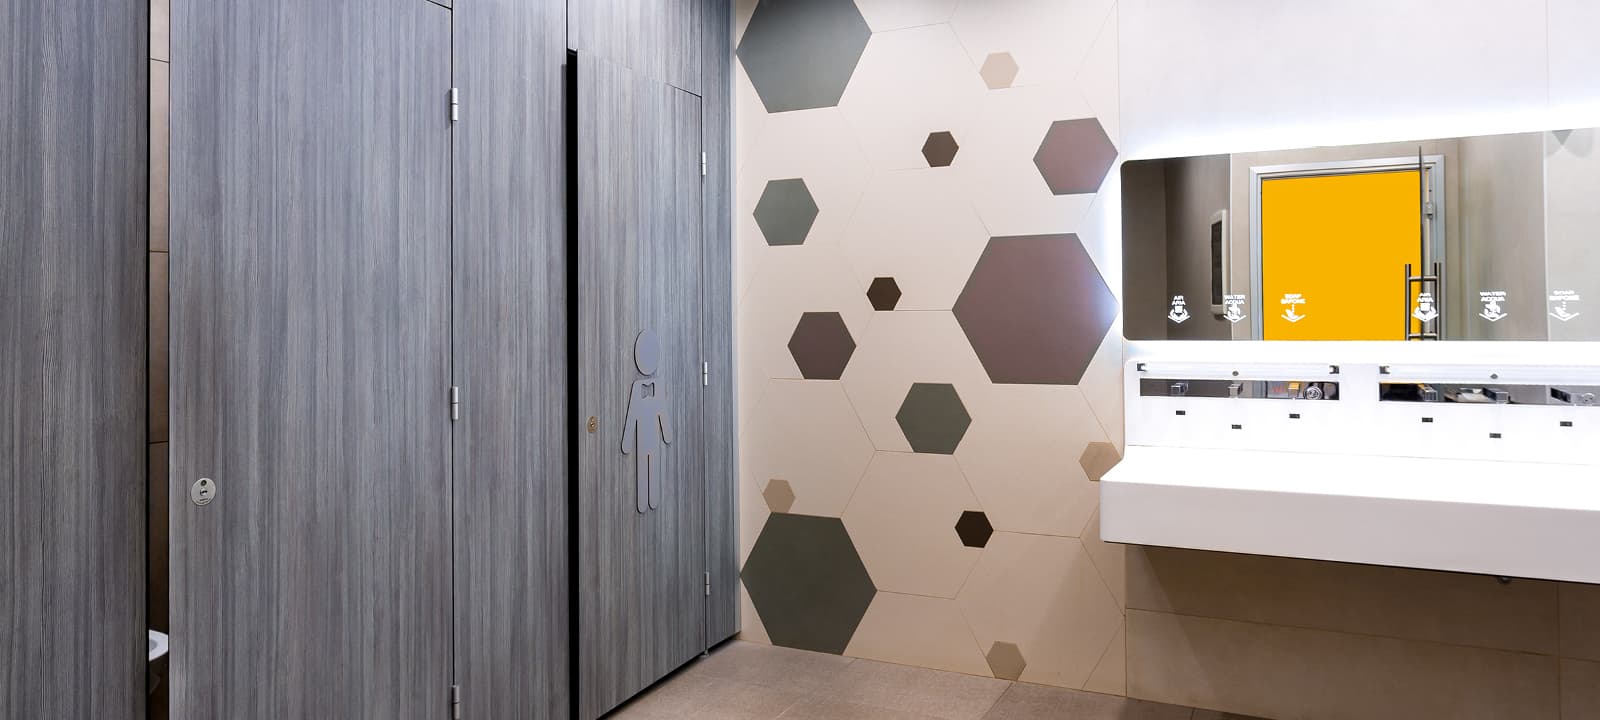 Cubicles, stalls and dividing walls for highly-frequented hygienic spaces